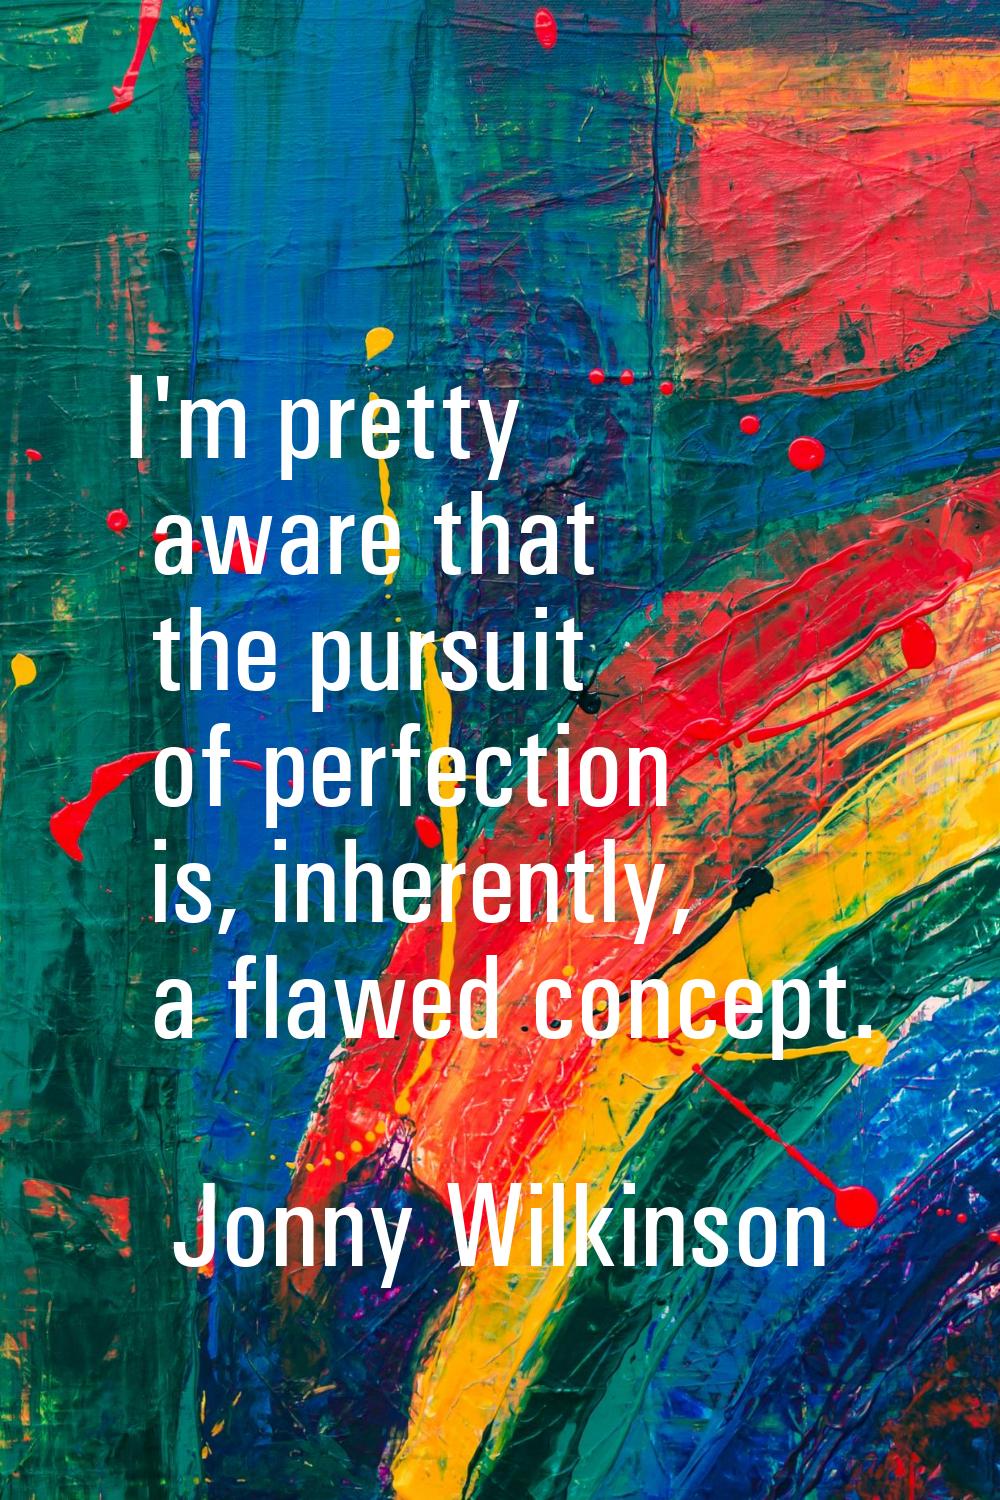 I'm pretty aware that the pursuit of perfection is, inherently, a flawed concept.